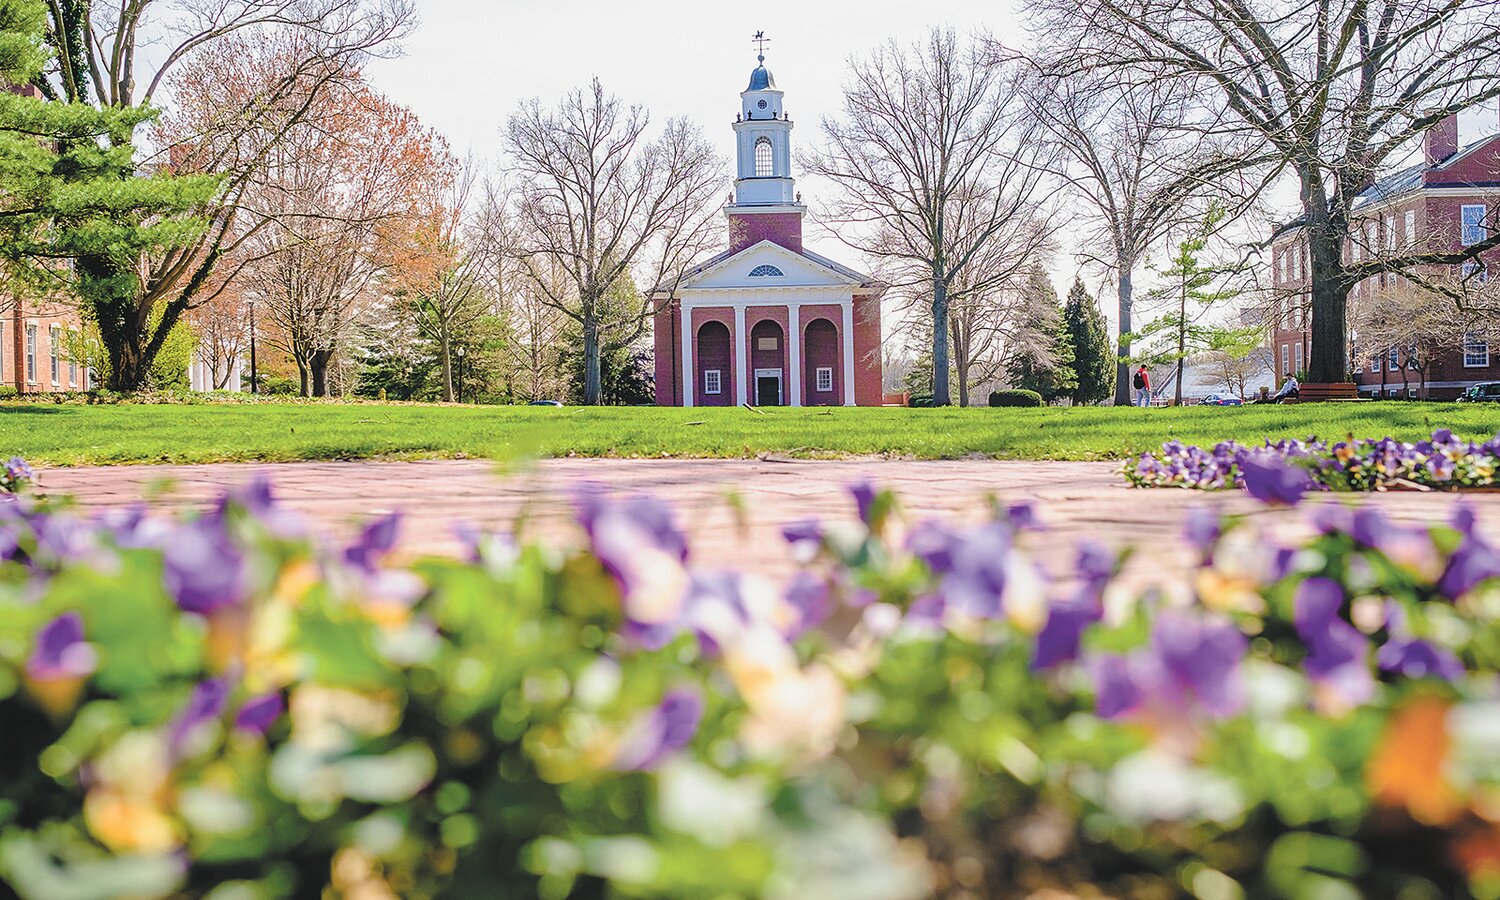 The Pioneer Chapel is the centerpiece of the Wabash College campus. The 191-year-old liberal arts college in Crawfordsville just completed the Giant Steps Campaign, largest comprehensive campaign in school history, by raising more than $250 million.